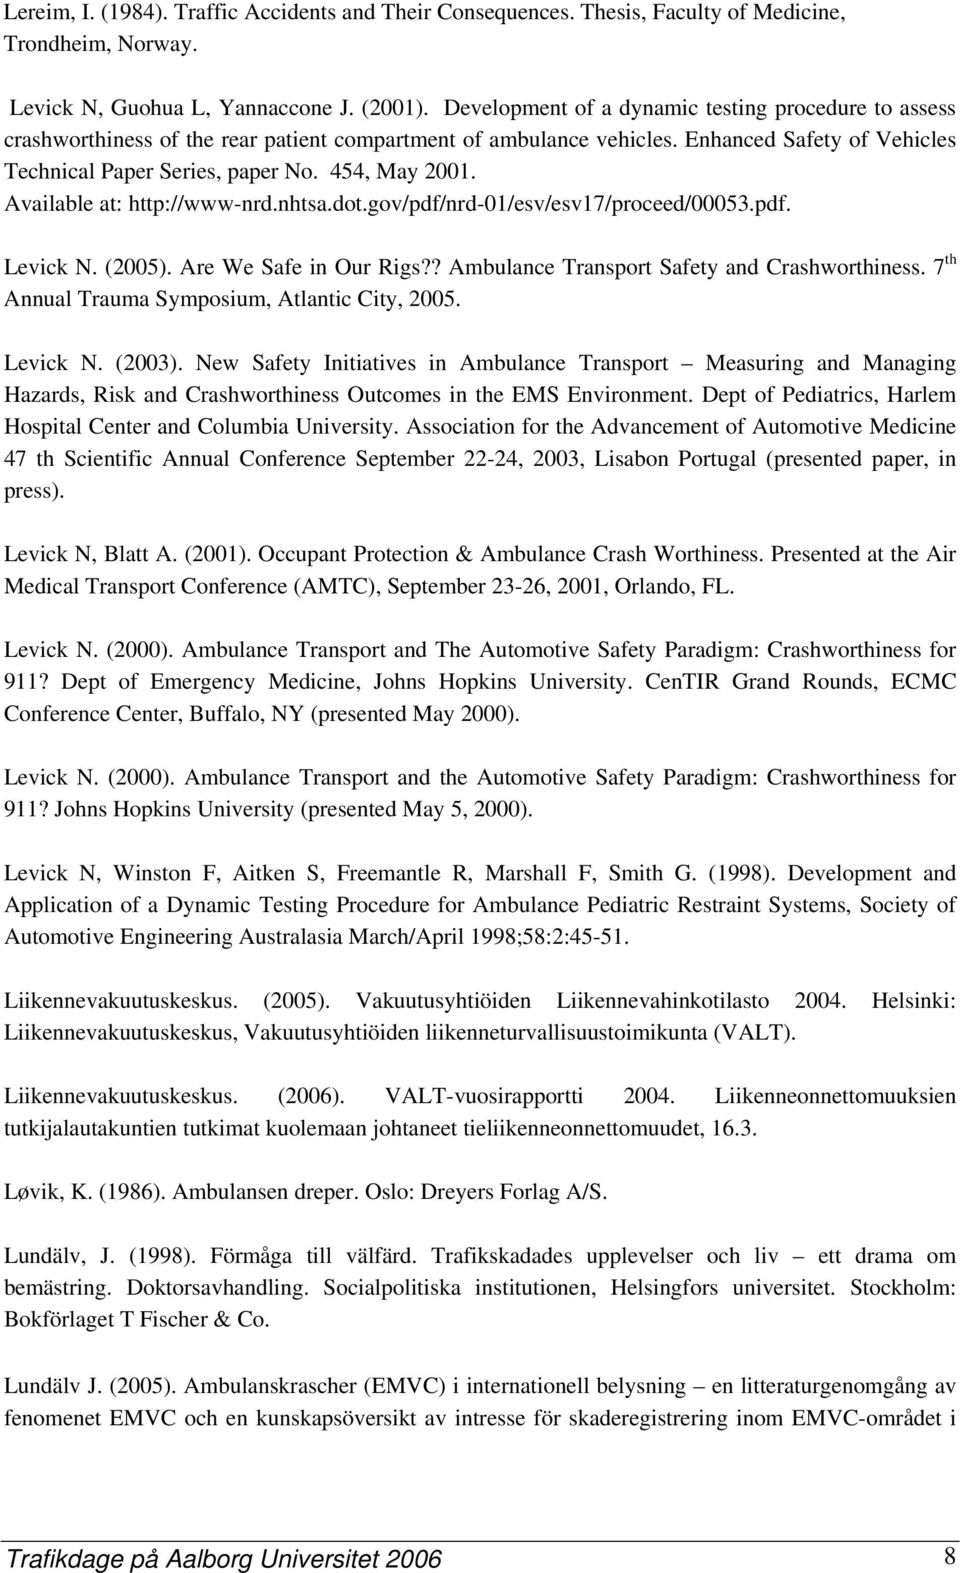 Available at: http://www-nrd.nhtsa.dot.gov/pdf/nrd-01/esv/esv17/proceed/00053.pdf. Levick N. (2005). Are We Safe in Our Rigs?? Ambulance Transport Safety and Crashworthiness.